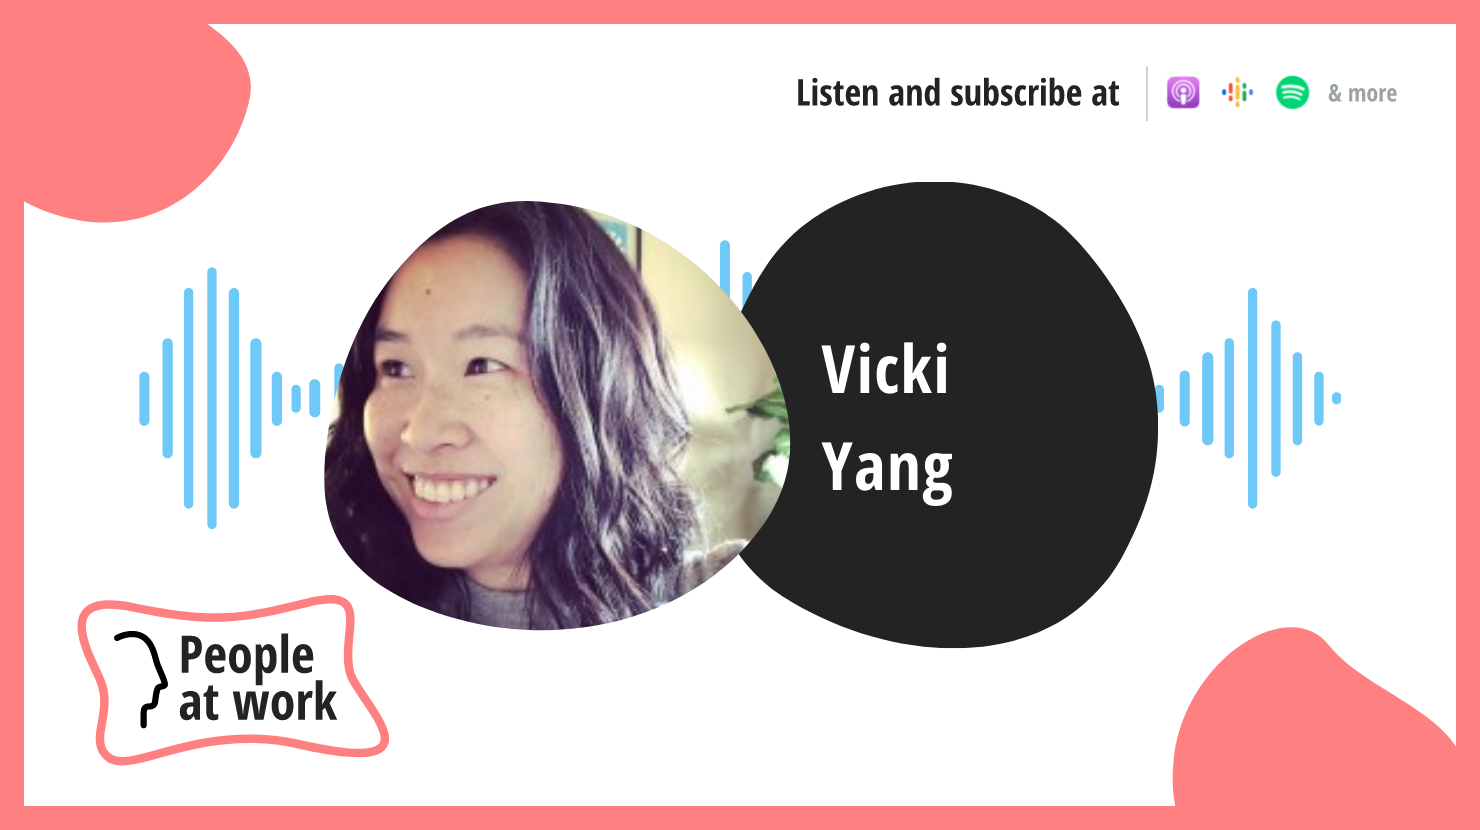 Learning how to hybrid work with Vicki Yang